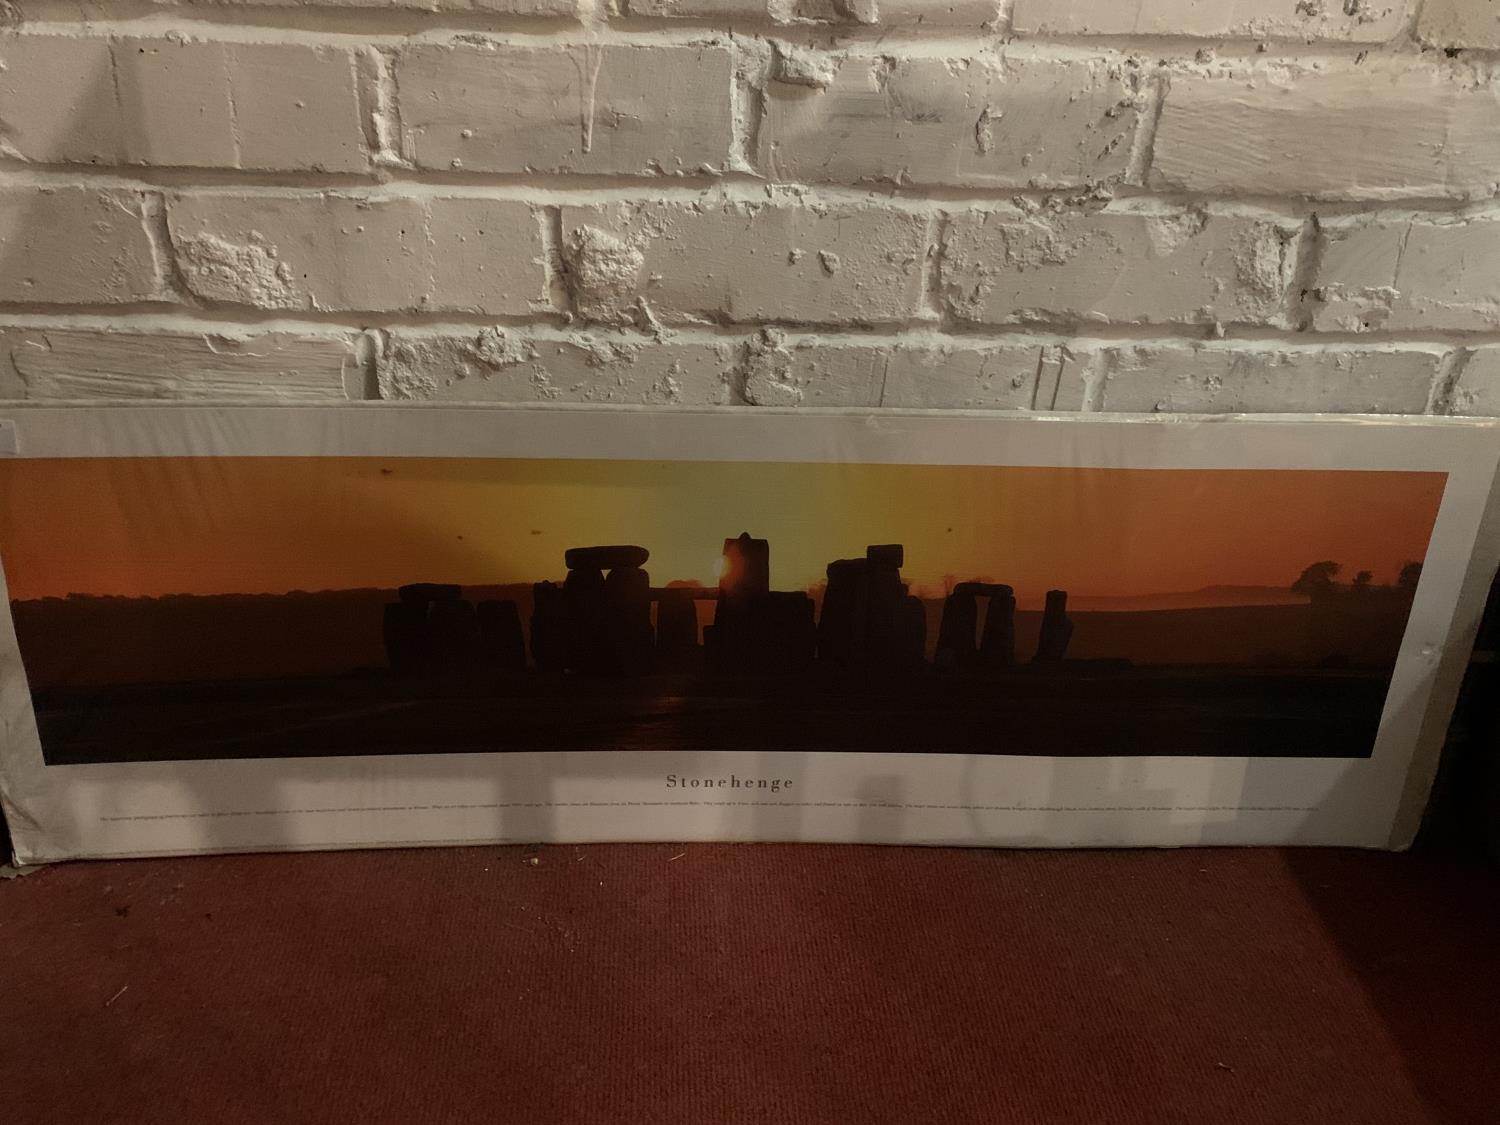 A PANORAMIC PHOTOGRAPH OF STONEHENGE BY JAMES BLAKEWAY